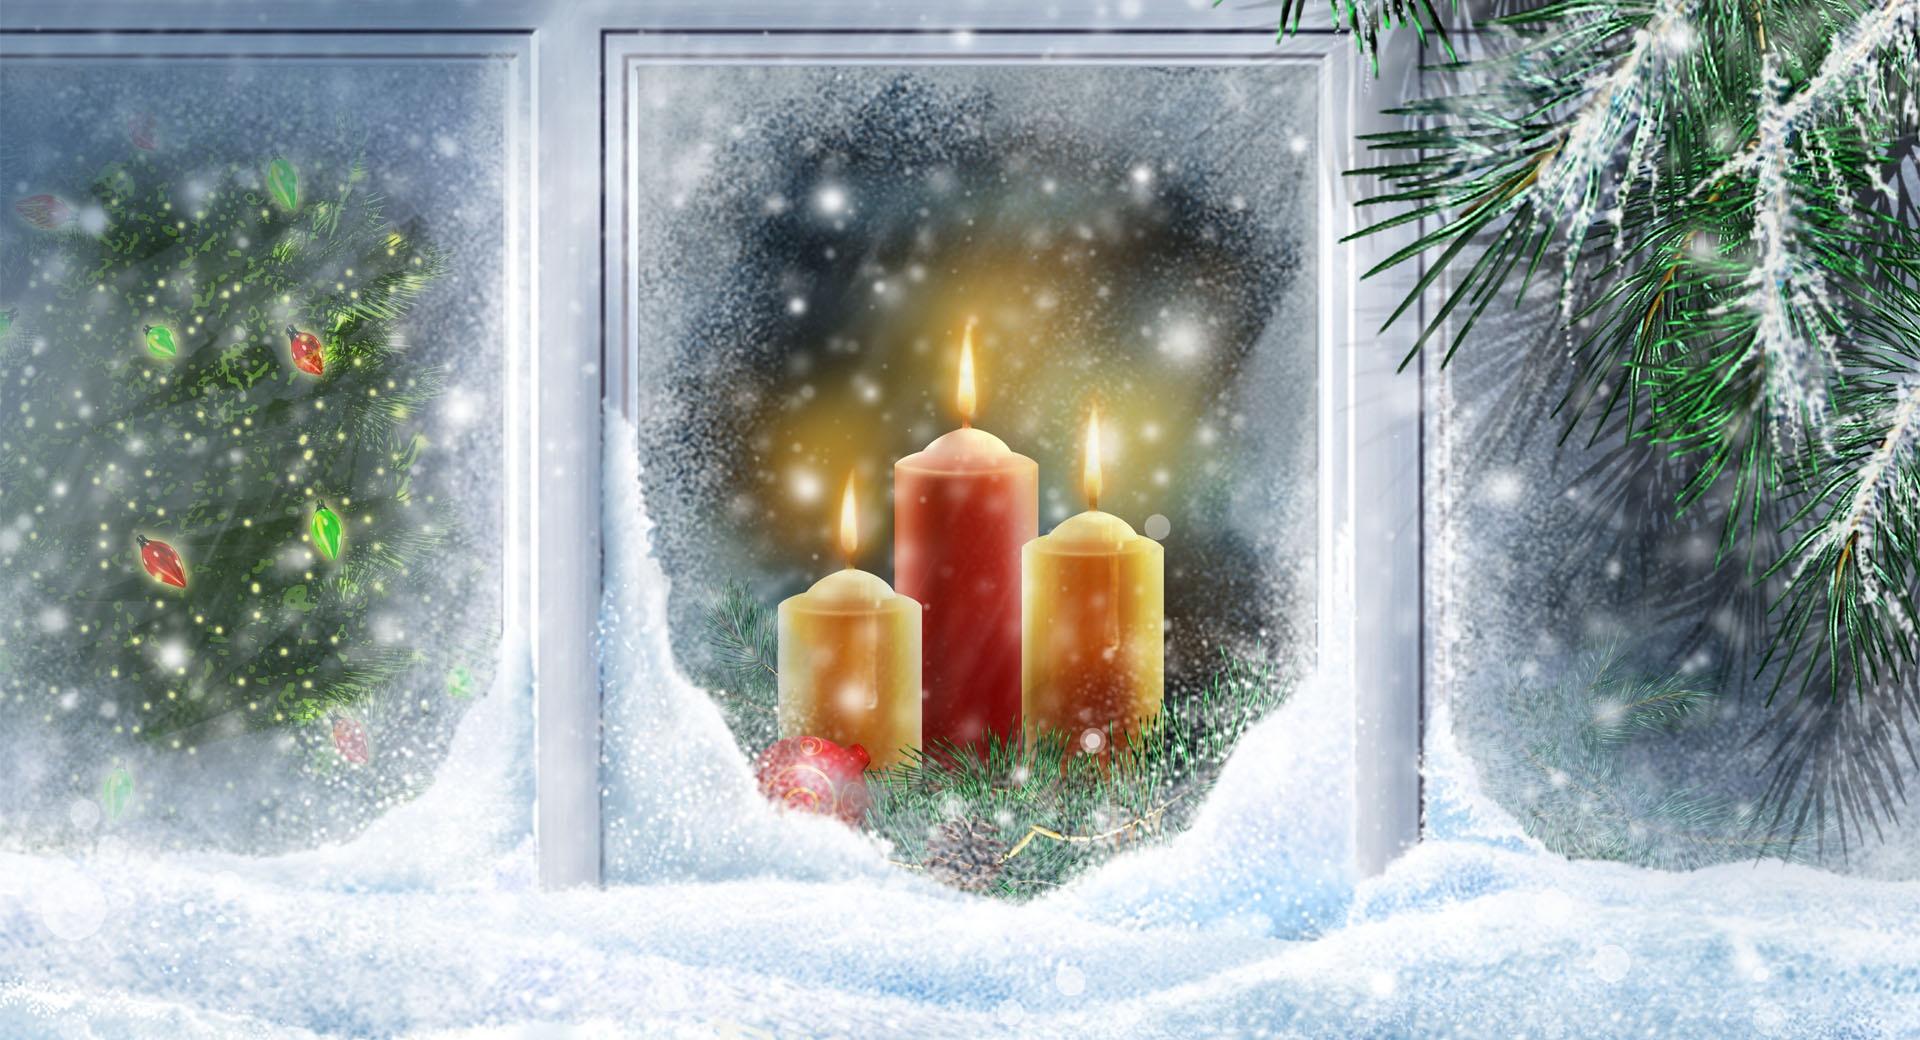 Special Wishes At Christmas wallpapers HD quality